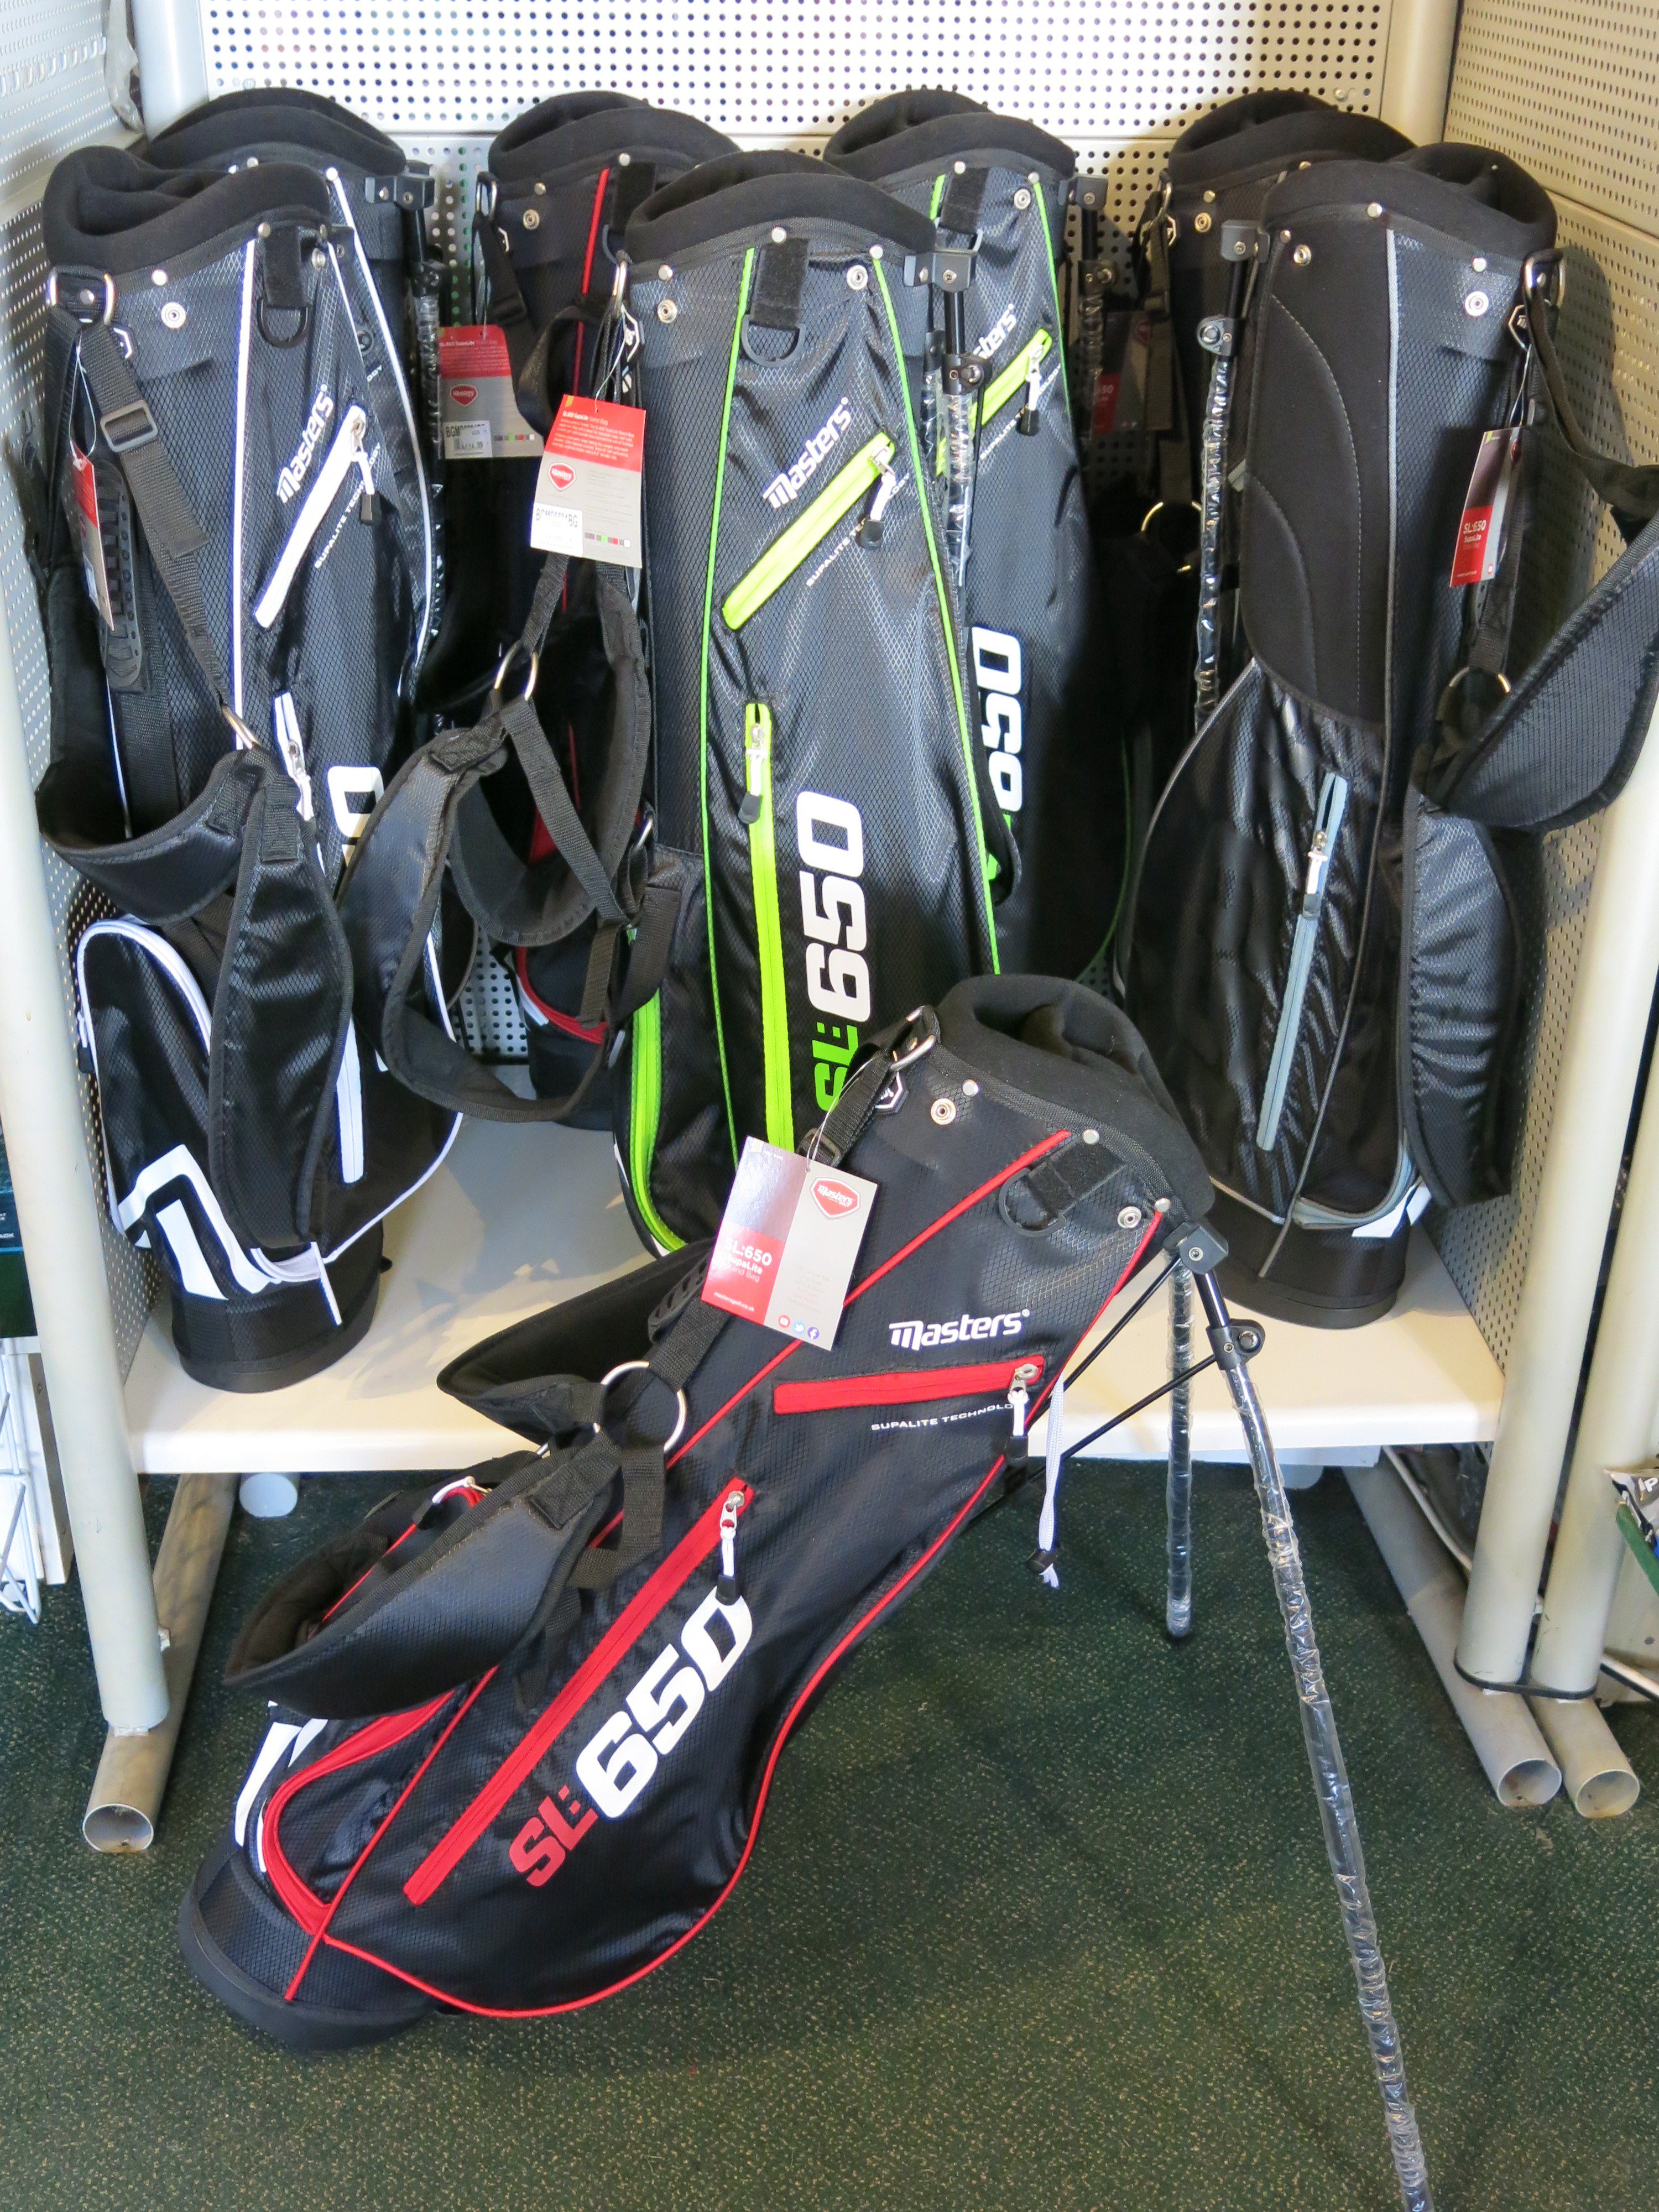 Shipton Golf Course Twitterissä: "Oh bother! No trolleys allowed on the  course! Not a problem with @mastersHQ SL650 light weight stand bag. Perfect  for winter golf and just £34.99 with no muddy